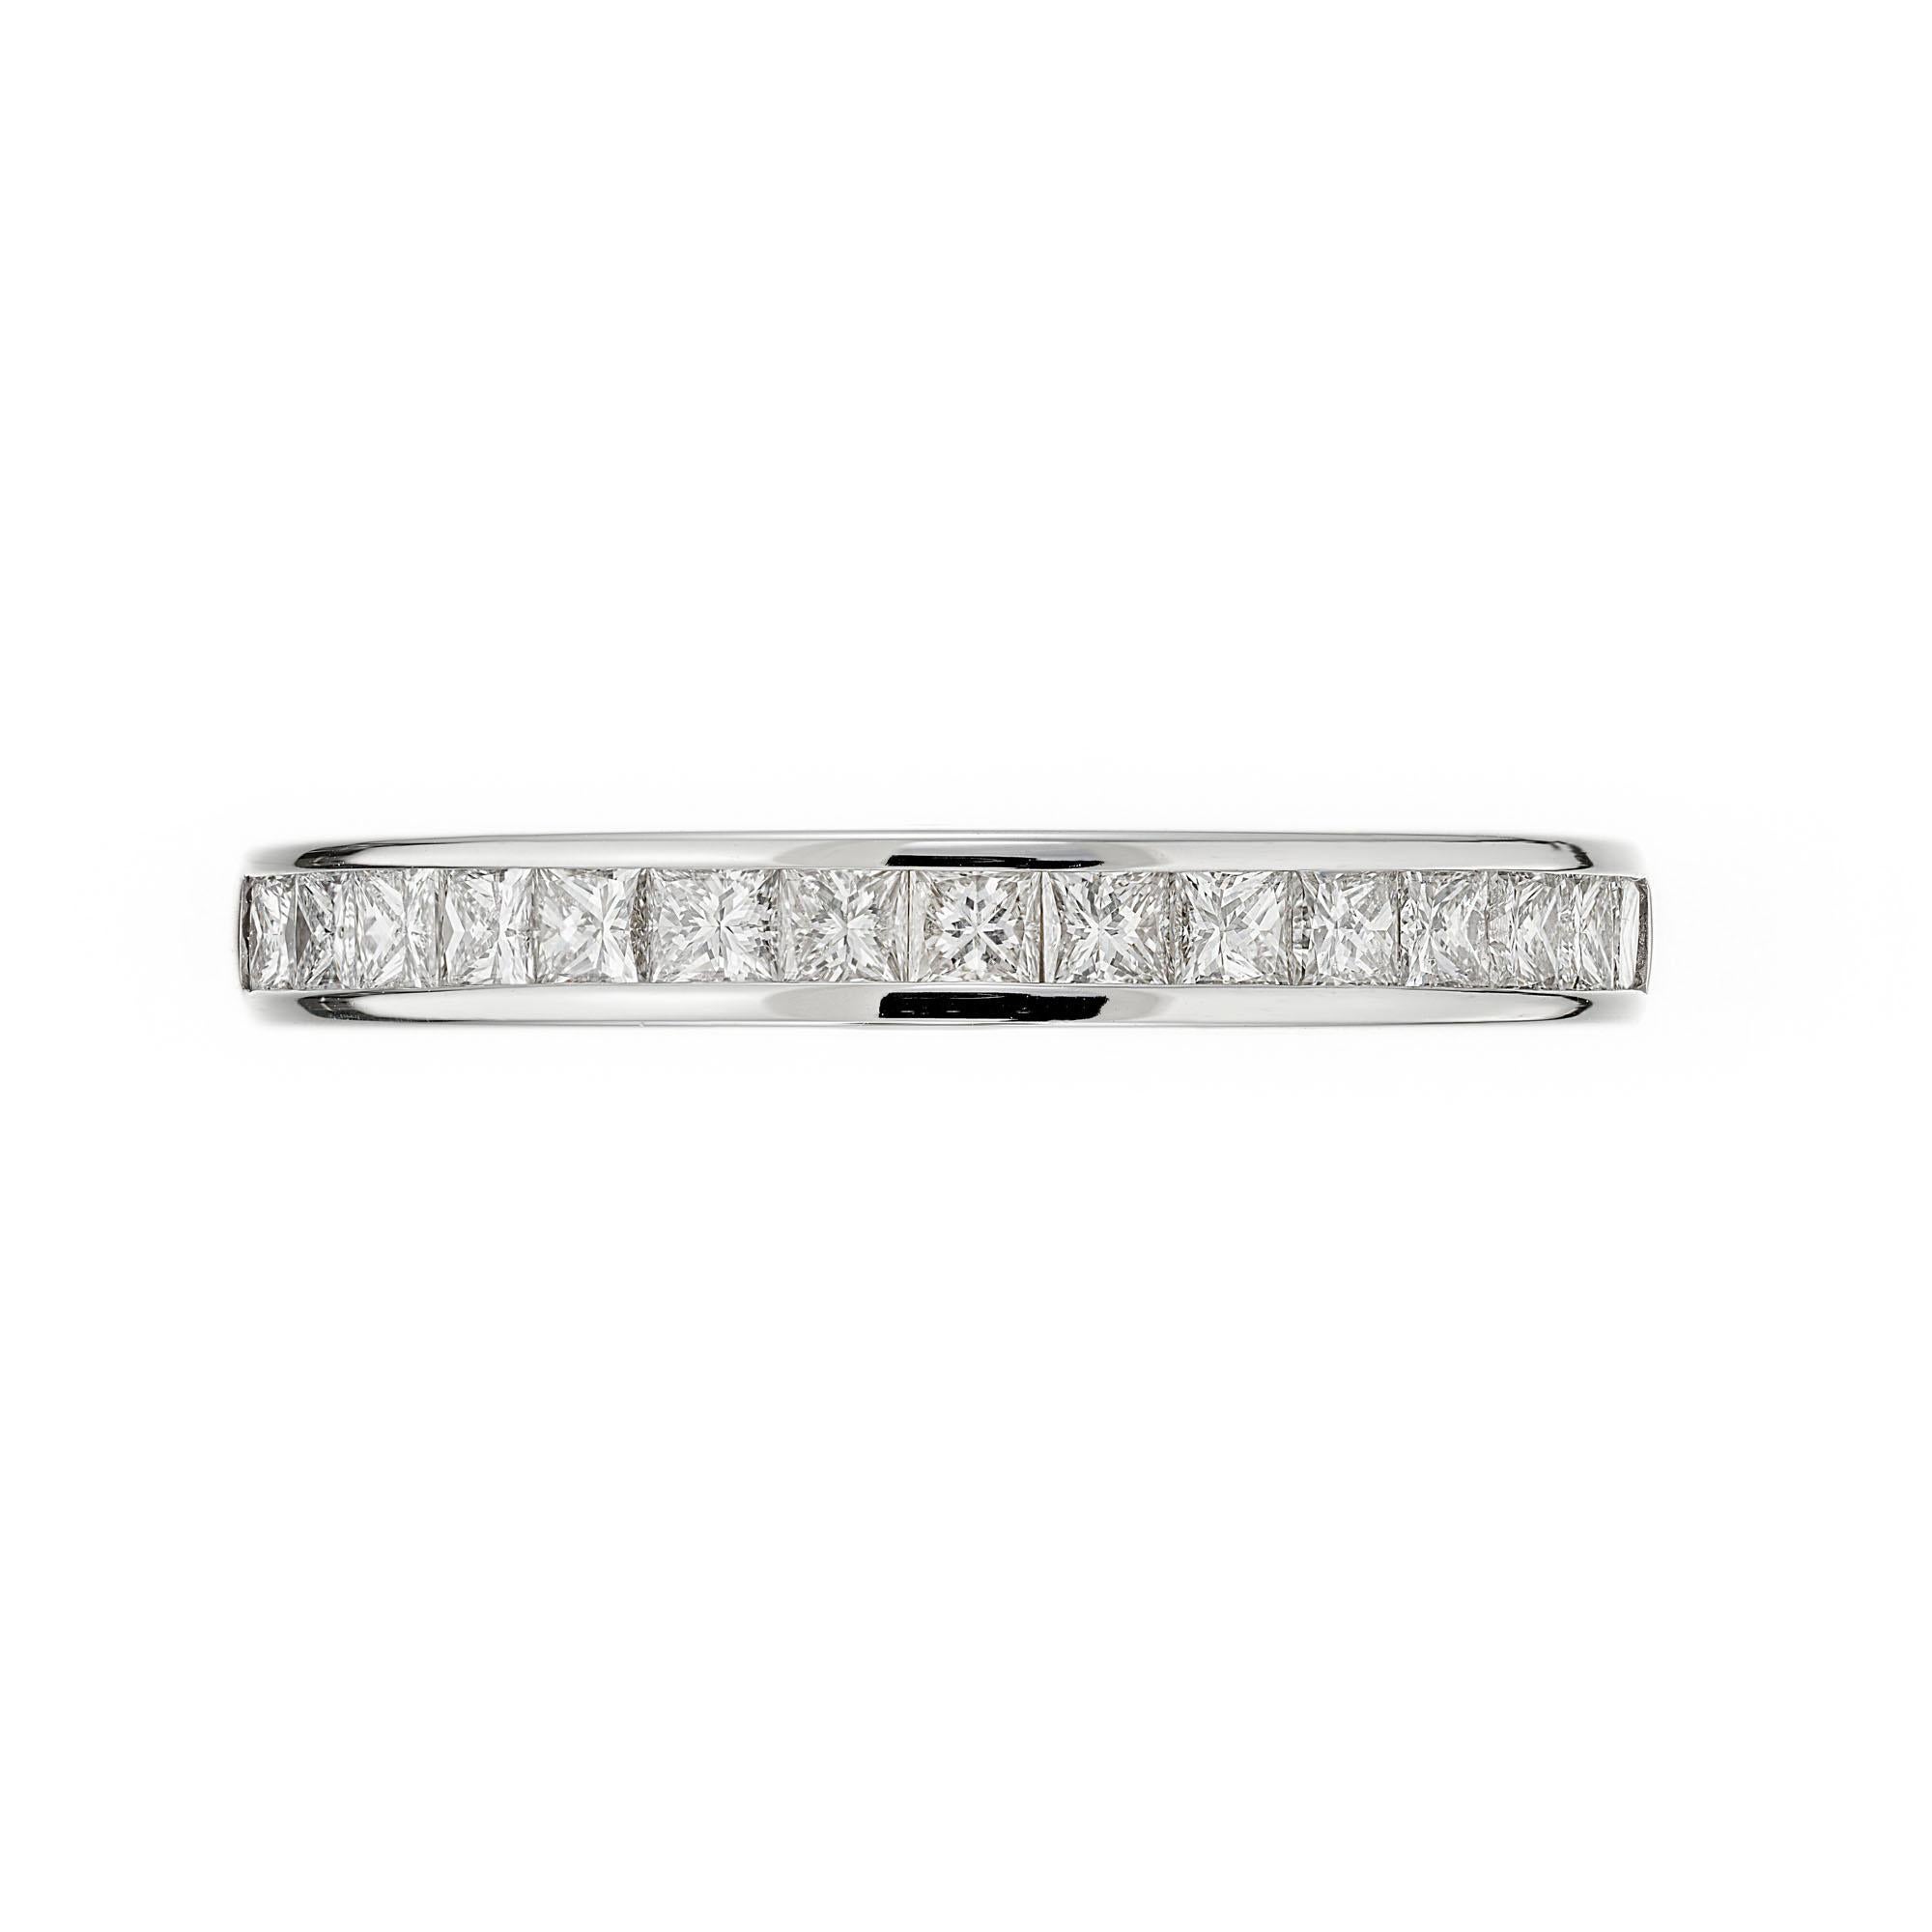 Classic half way around channel style Princess cut diamond wedding band. 15 princess cut .50ct  diamonds set in 18k white gold setting. 

15 Princess cut diamonds, approx. total weight .50cts, H, SI
Size 5.5 and sizable
18k white gold
Tested and